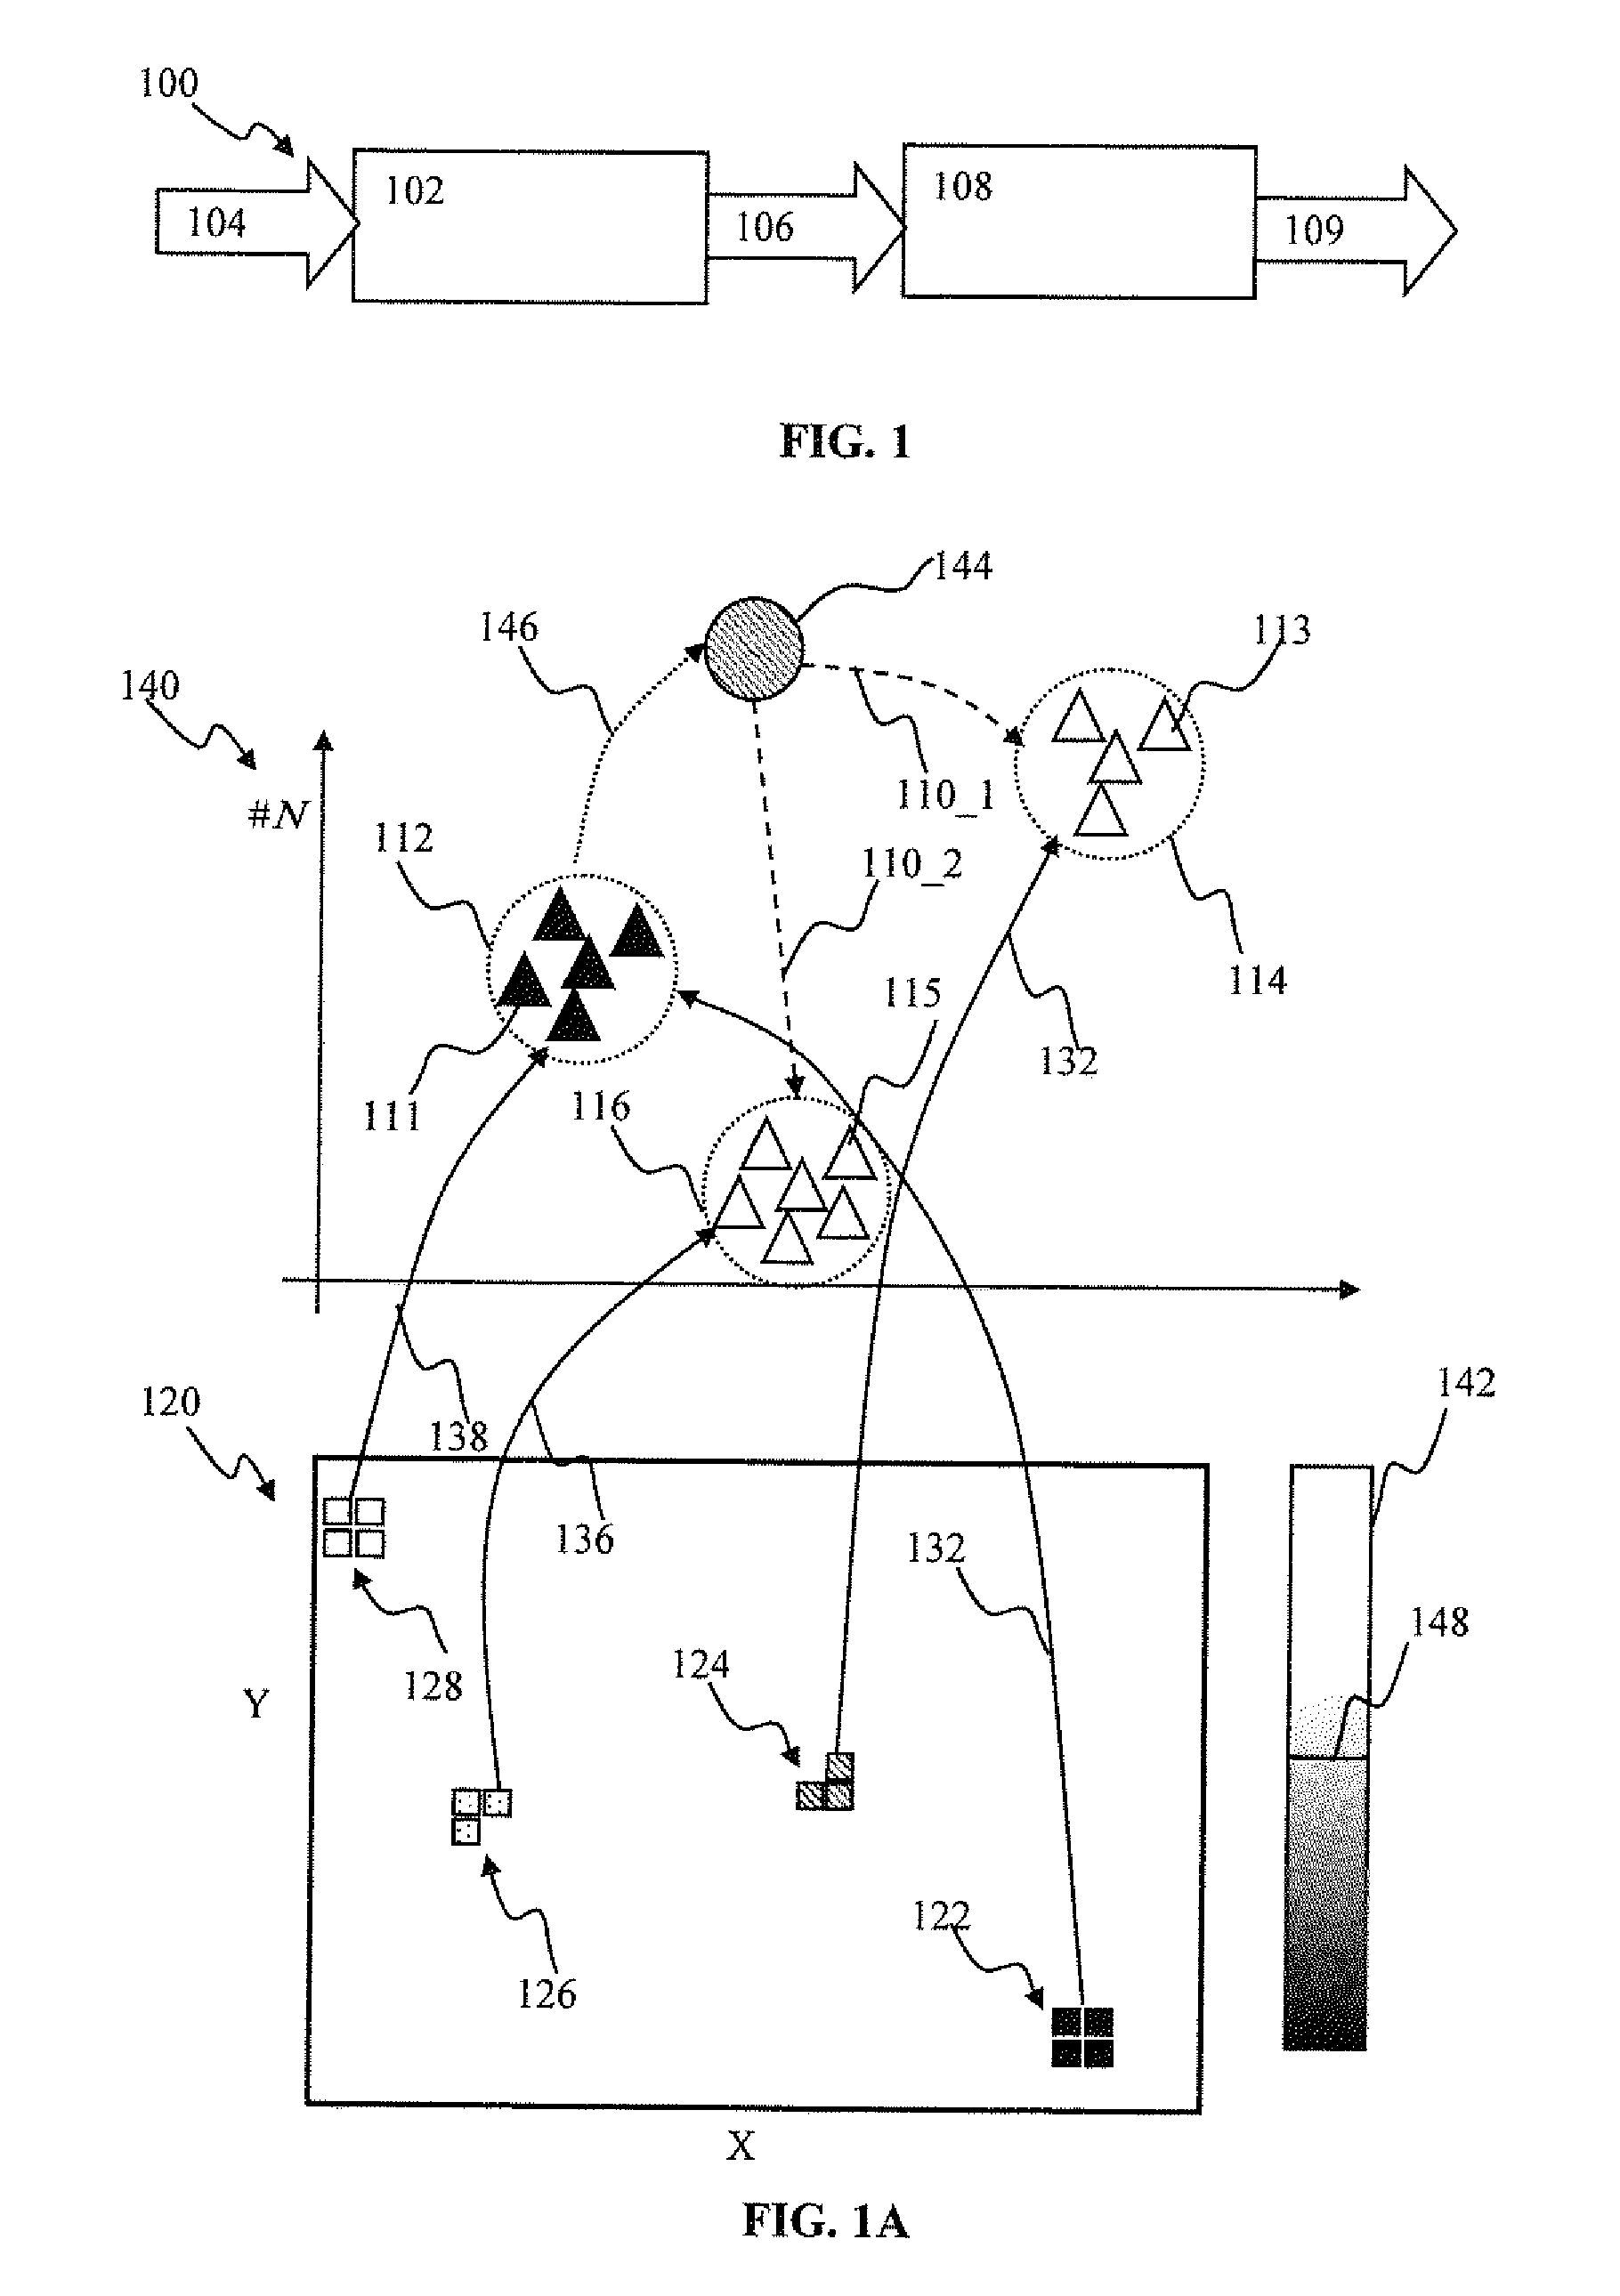 Temporal winner takes all spiking neuron network sensory processing apparatus and methods